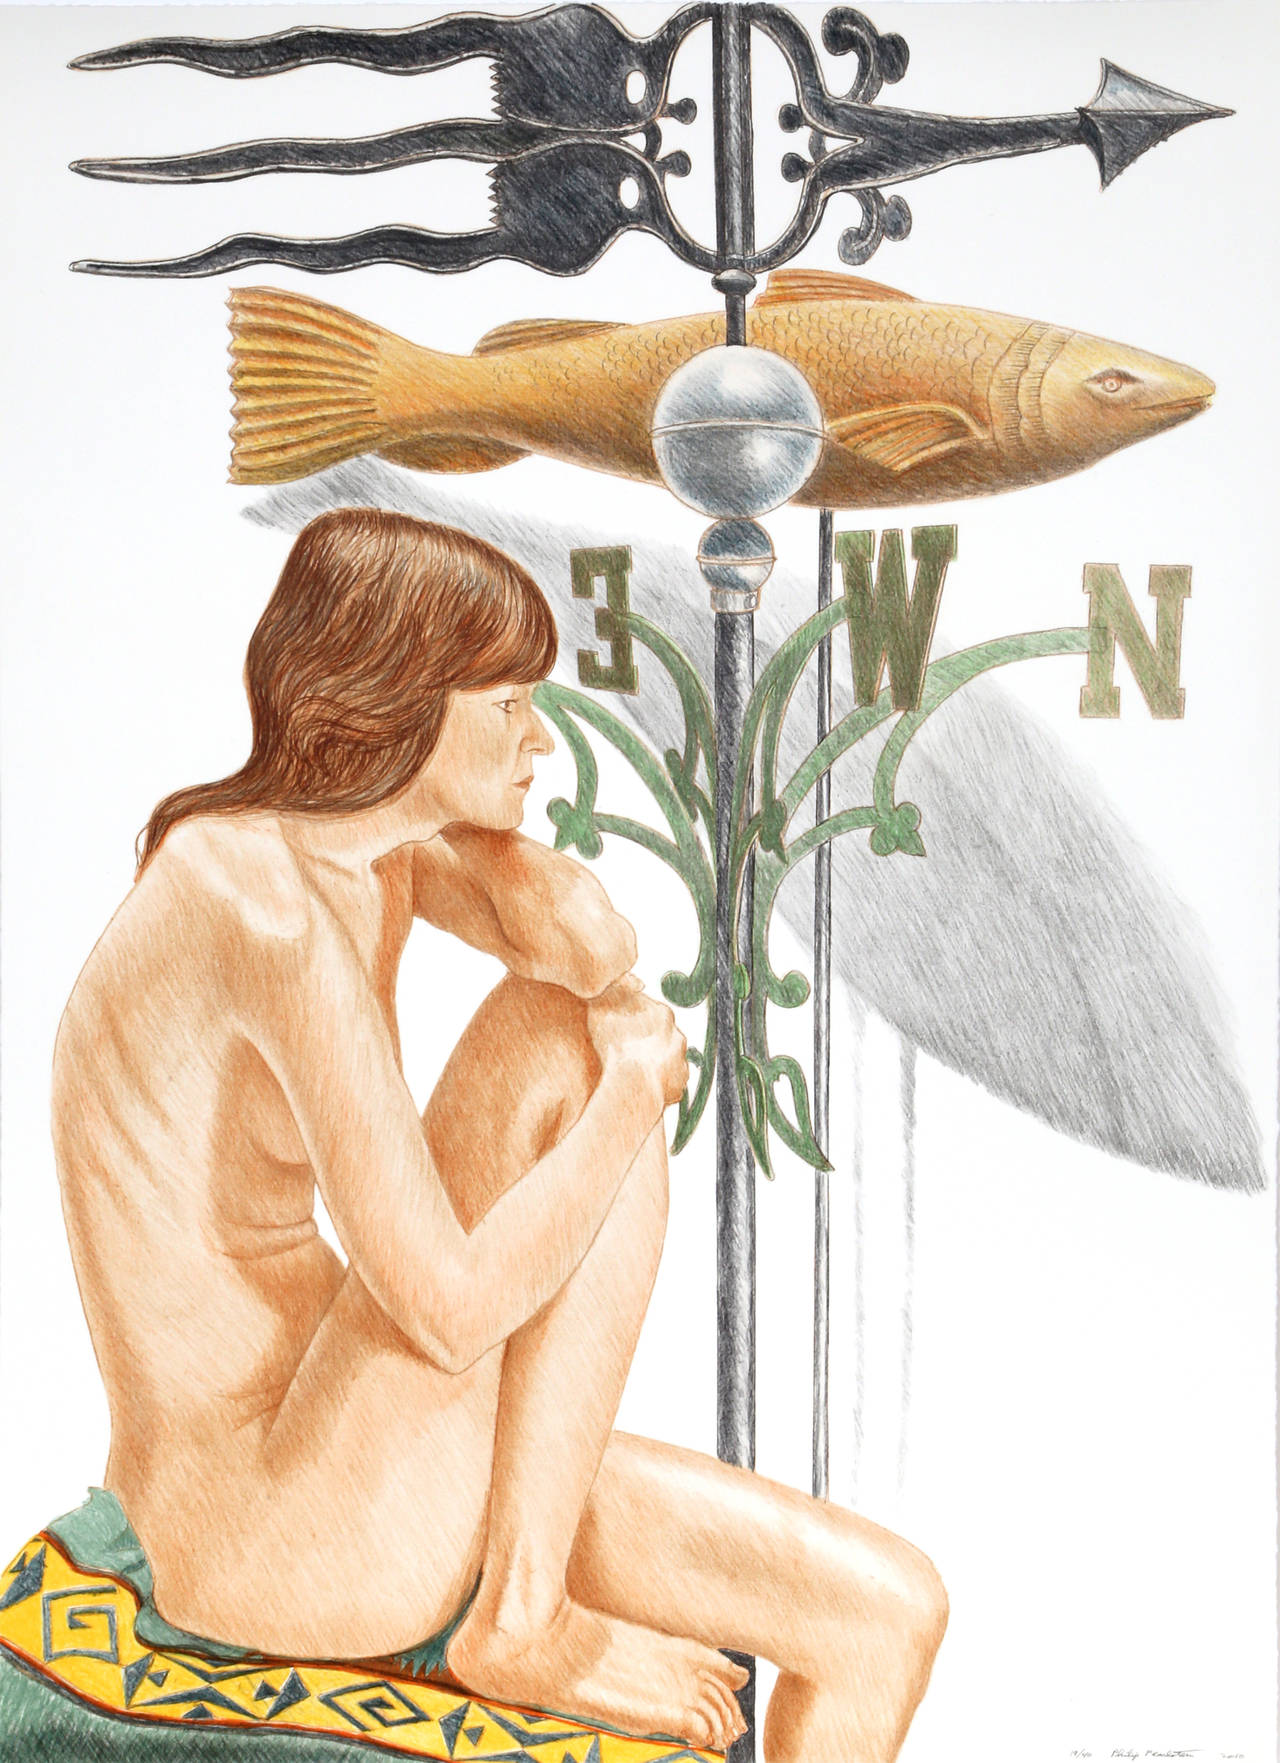 Philip Pearlstein Figurative Print - Nude Model with Banner and Fish Weathervanes